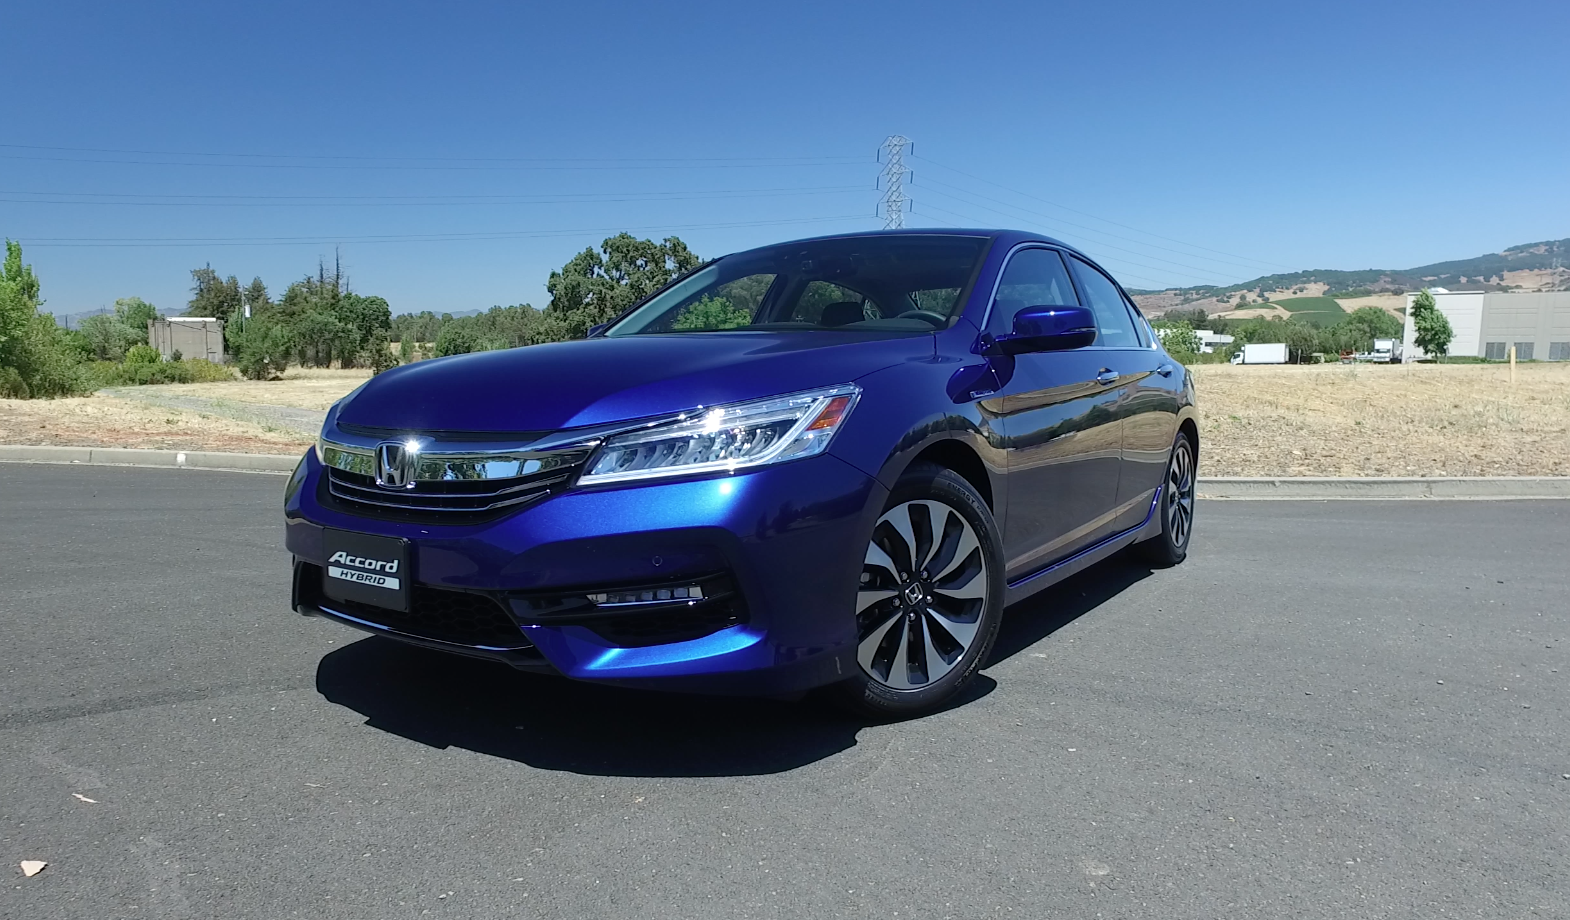 New 2017 Honda Accord Hybrid Boosts Power and Style (VIDEO)